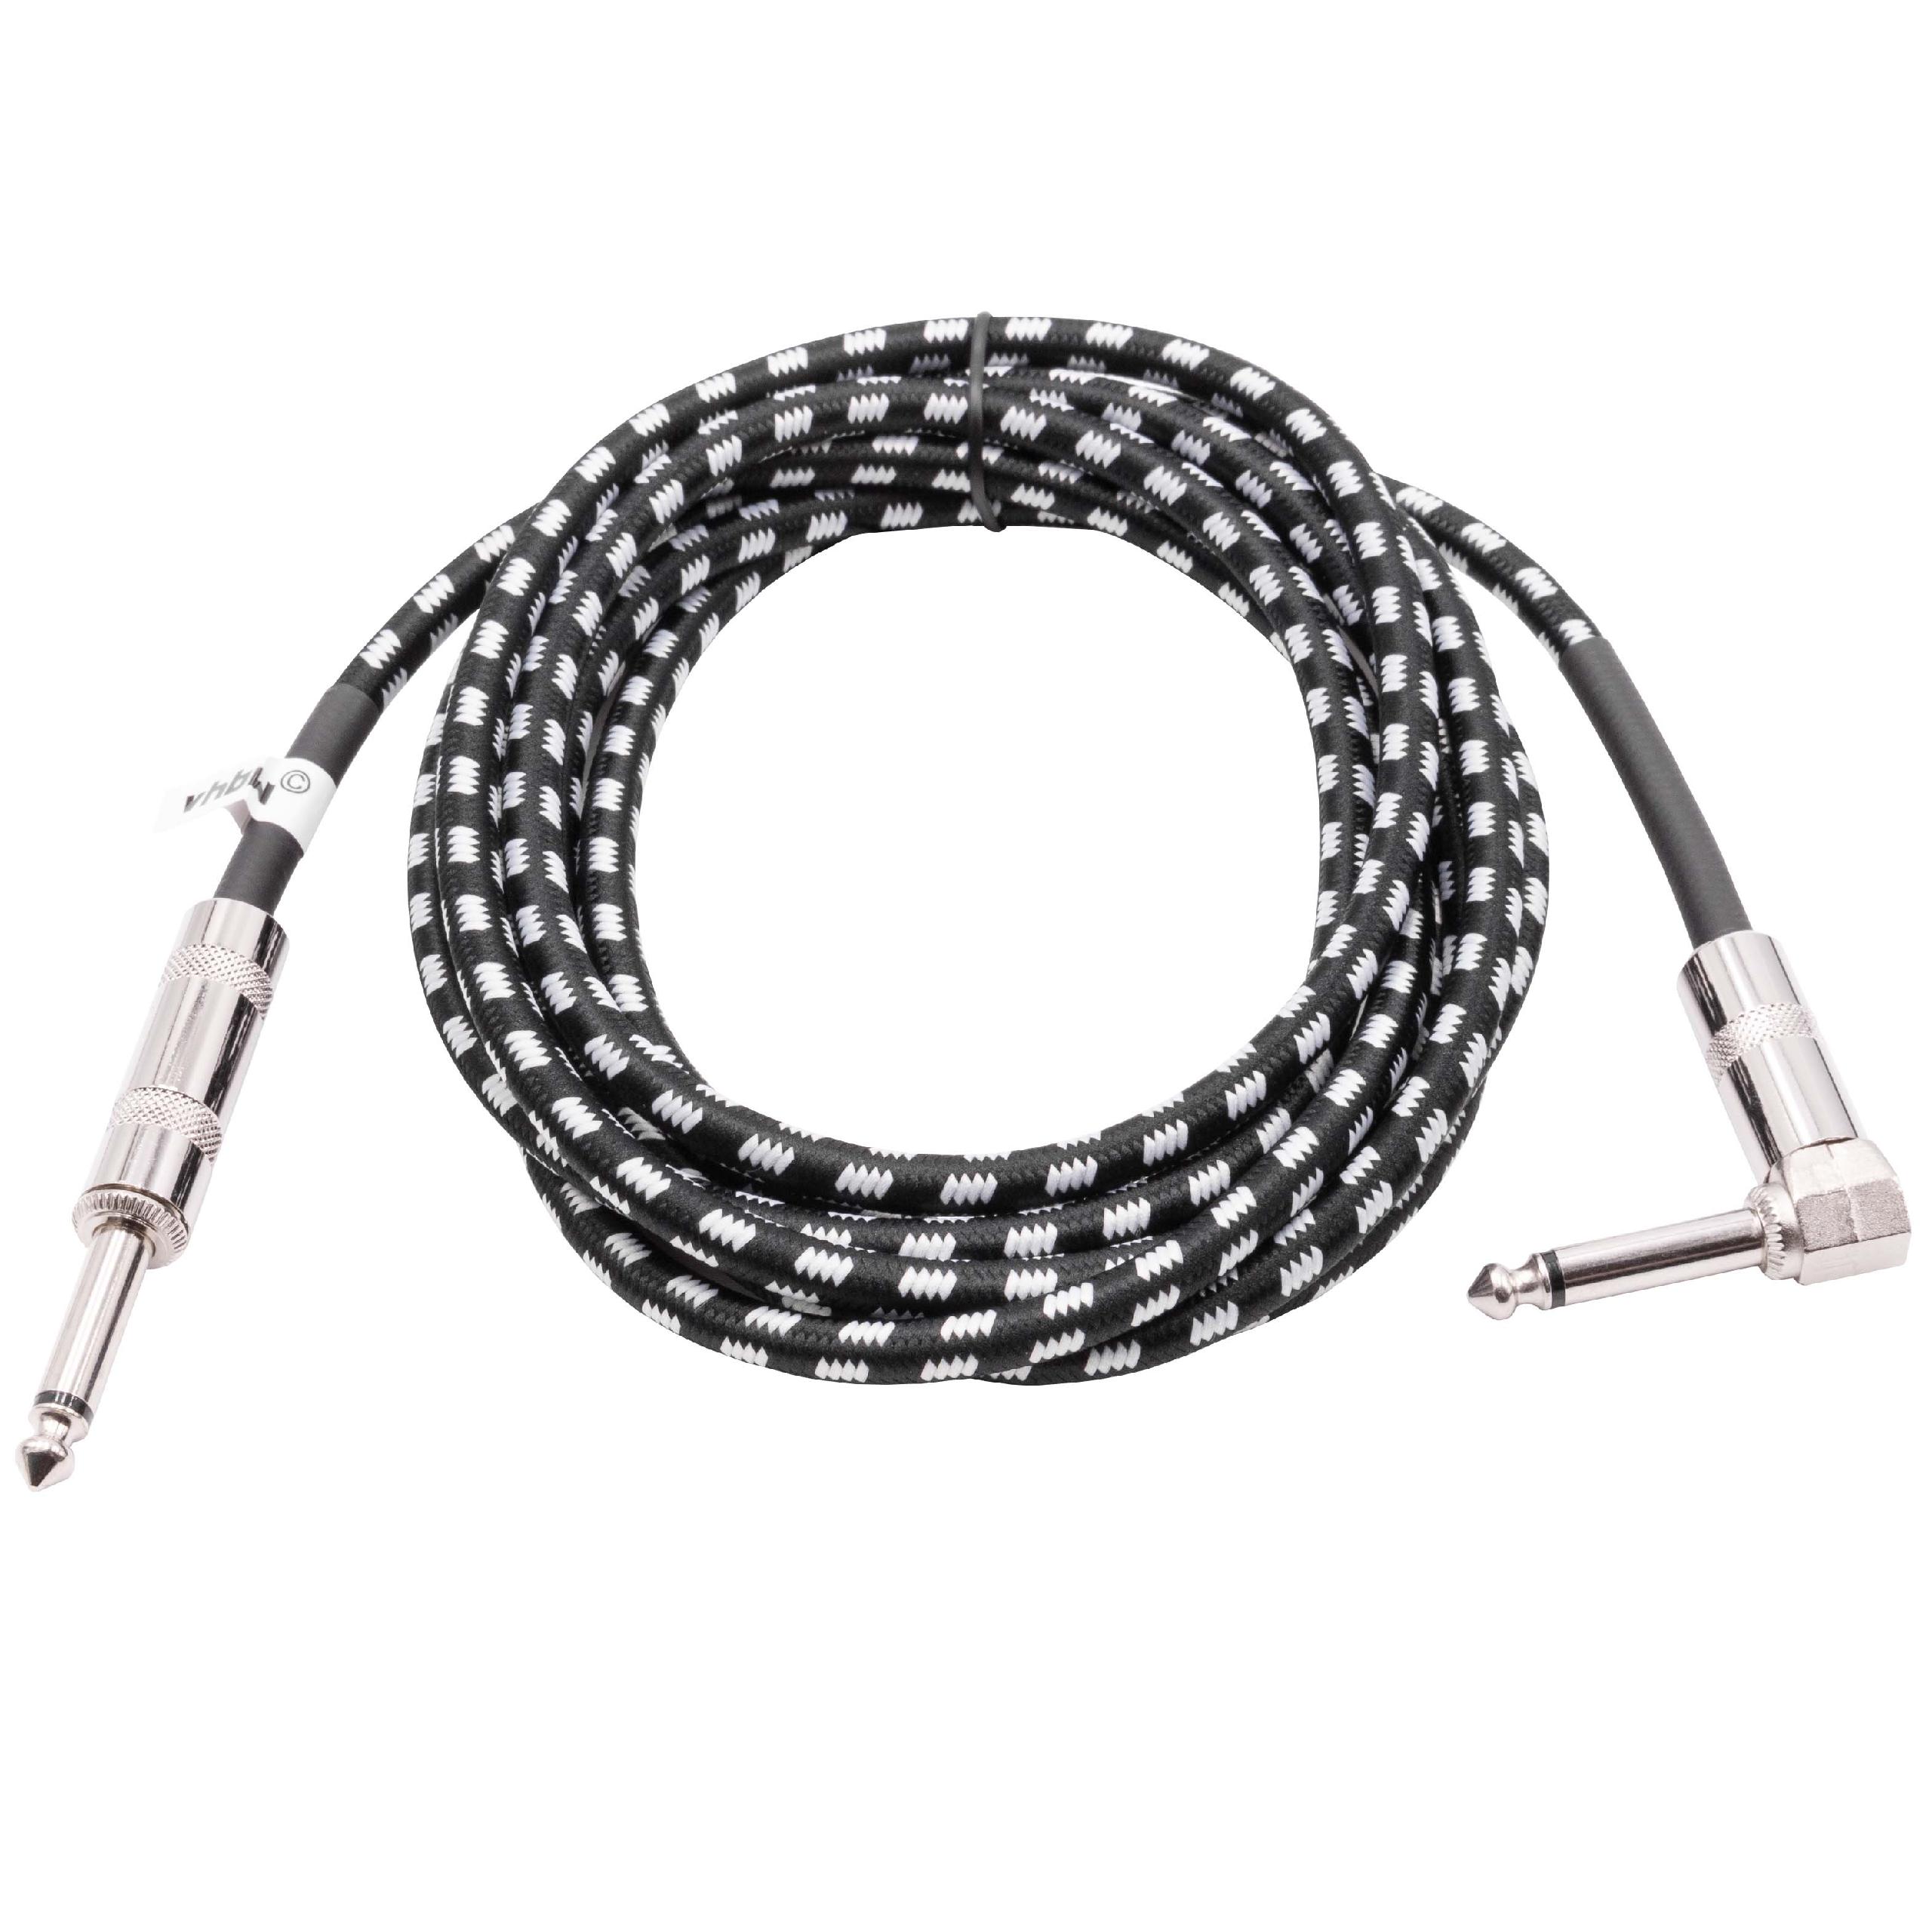 3m Guitar AUX Cable for Electric Guitar compatible with all 6.35mm Audio-Ports - Braided, Straight-Angled